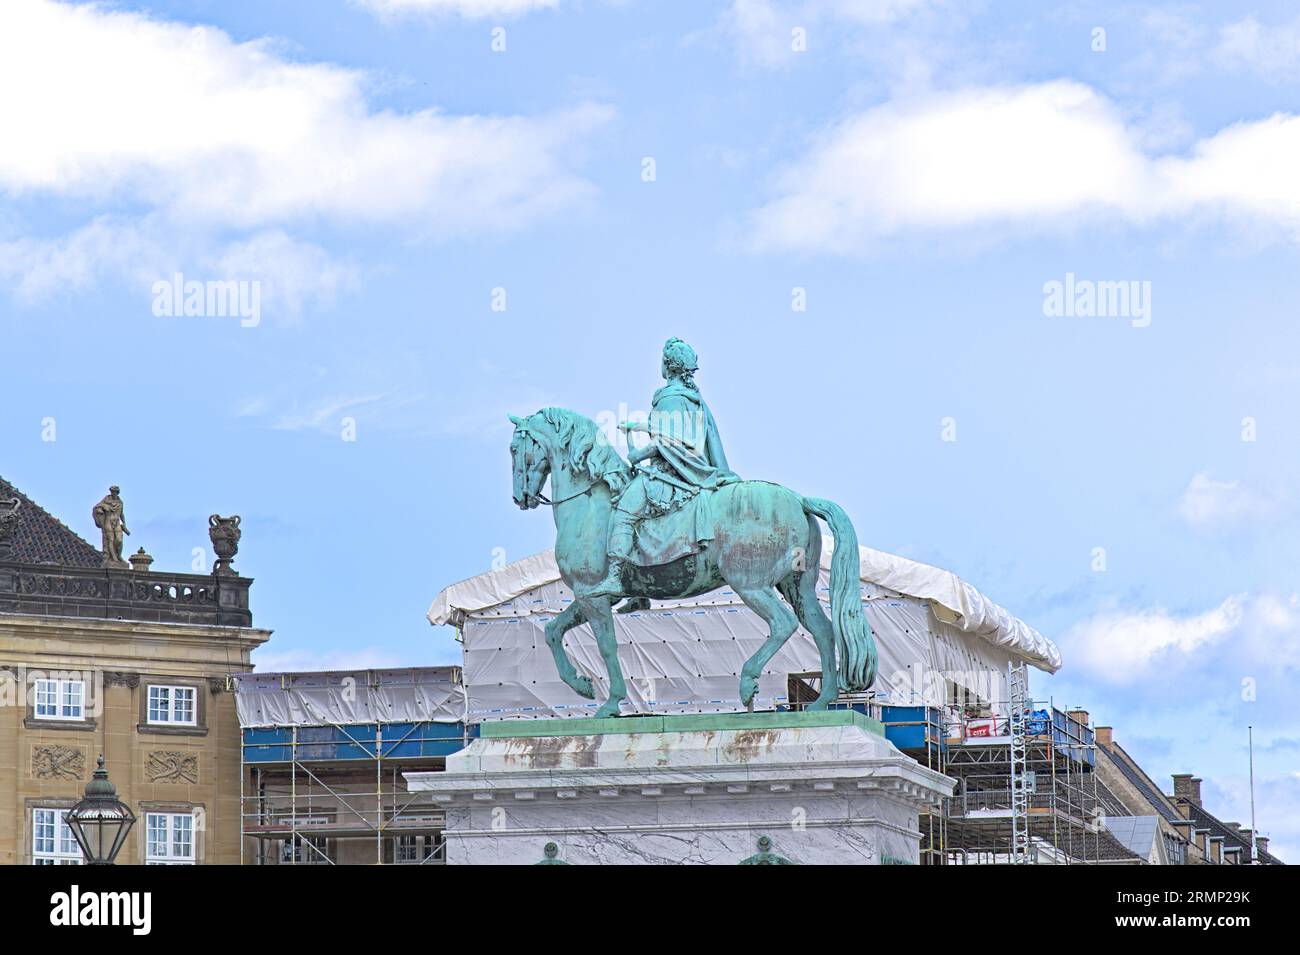 Bronze Equestrian Statue Monument of King Frederik V on the Amalienborg Palace Square in the capital of Copenhagen, Denmark Stock Photo